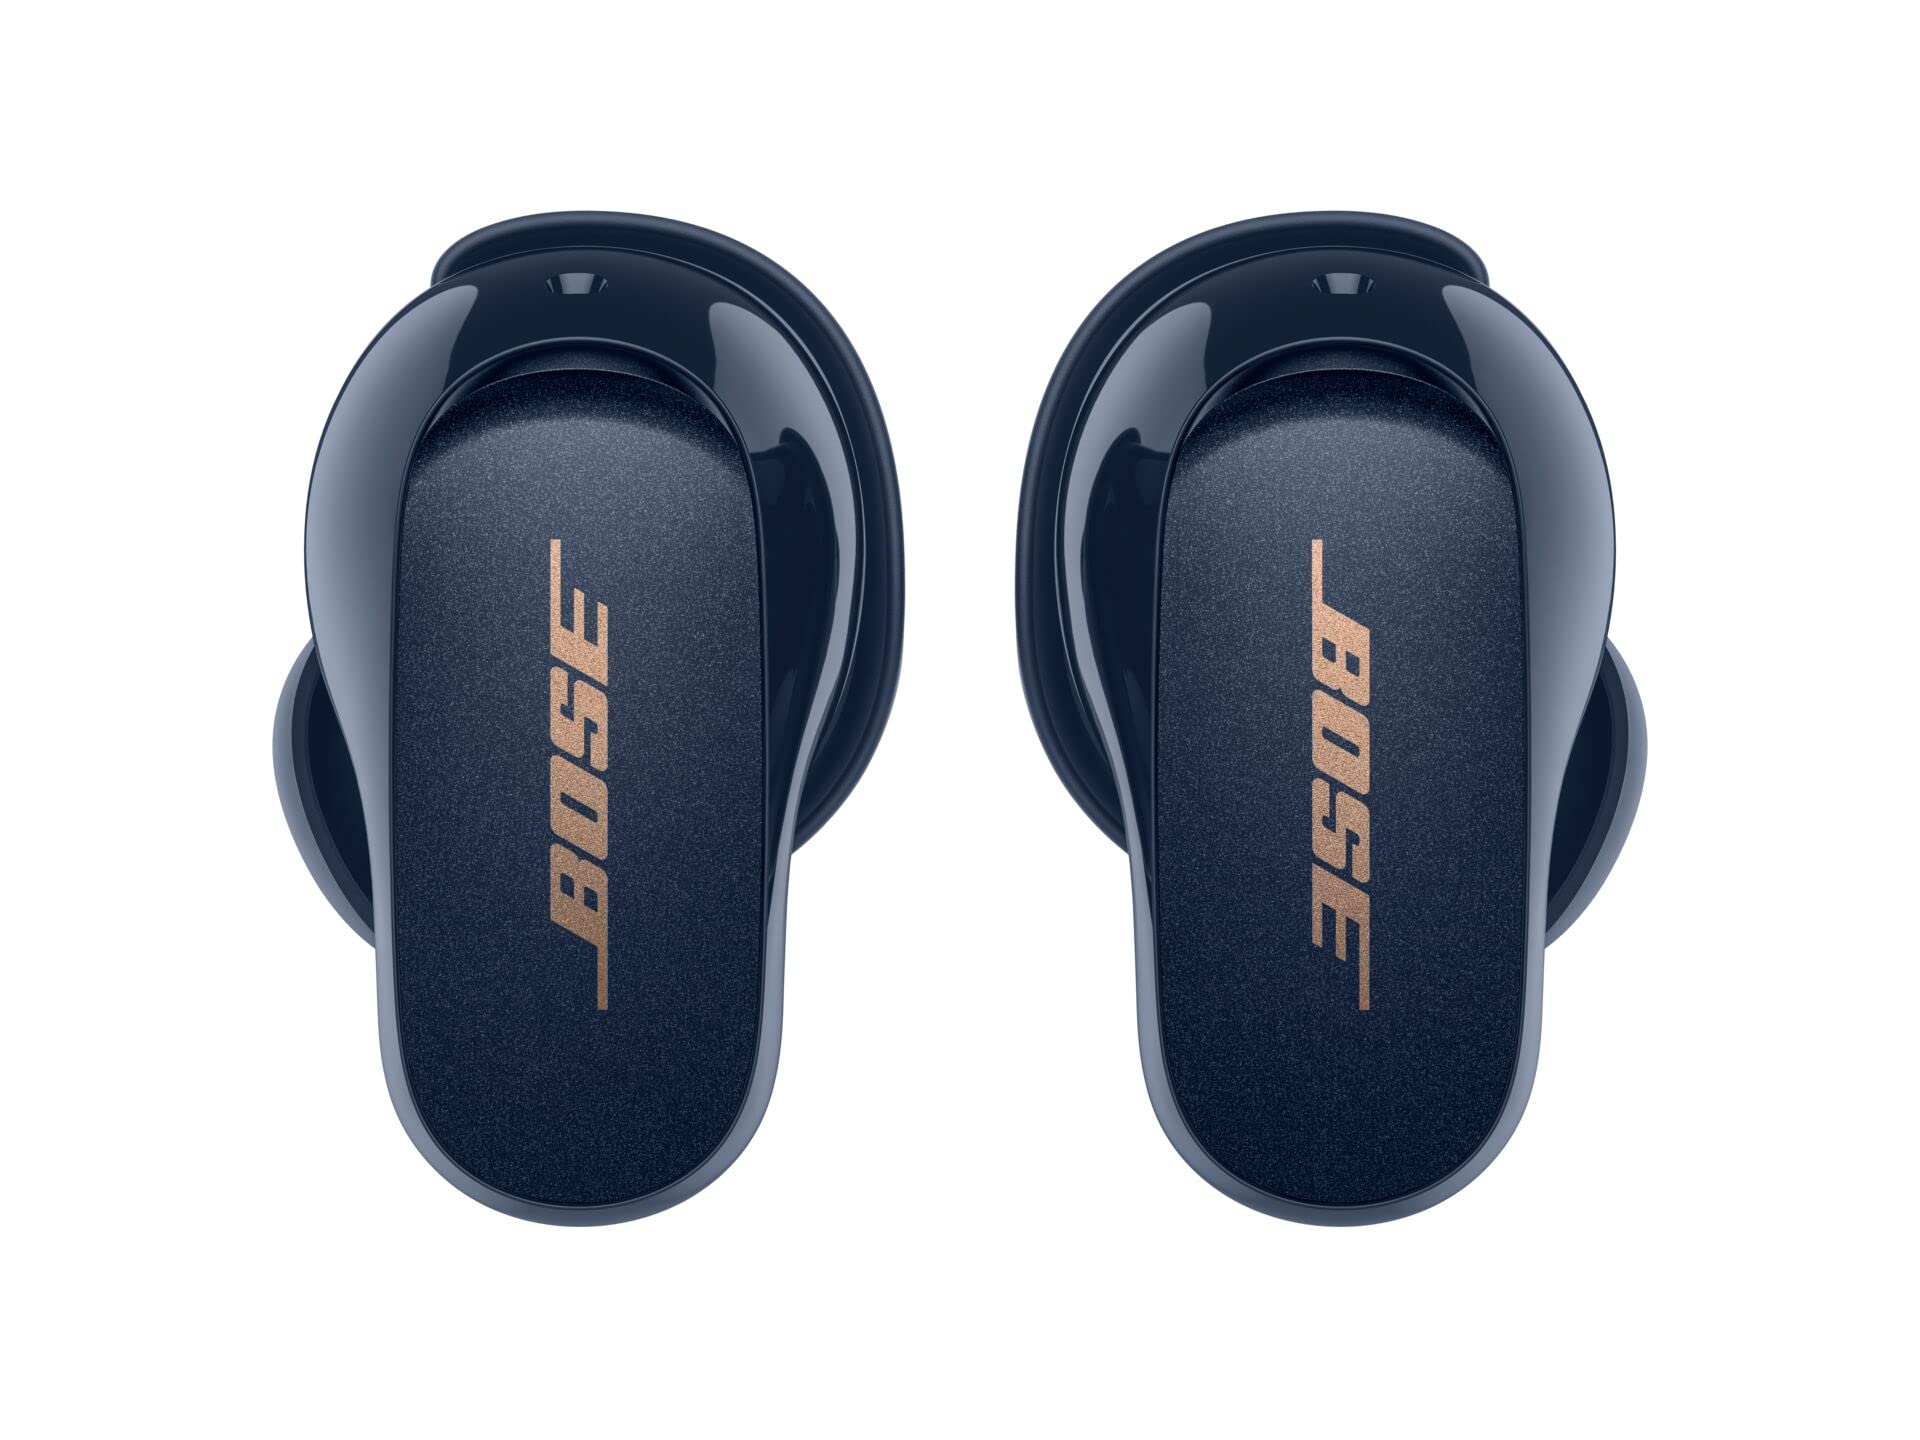 Bose QuietComfort Earbuds II, Wireless, Bluetooth, World’s Best Noise Cancelling In-Ear Headphones with Personalized Noise Cancellation & Sound, Midnight Blue - Limited Edition